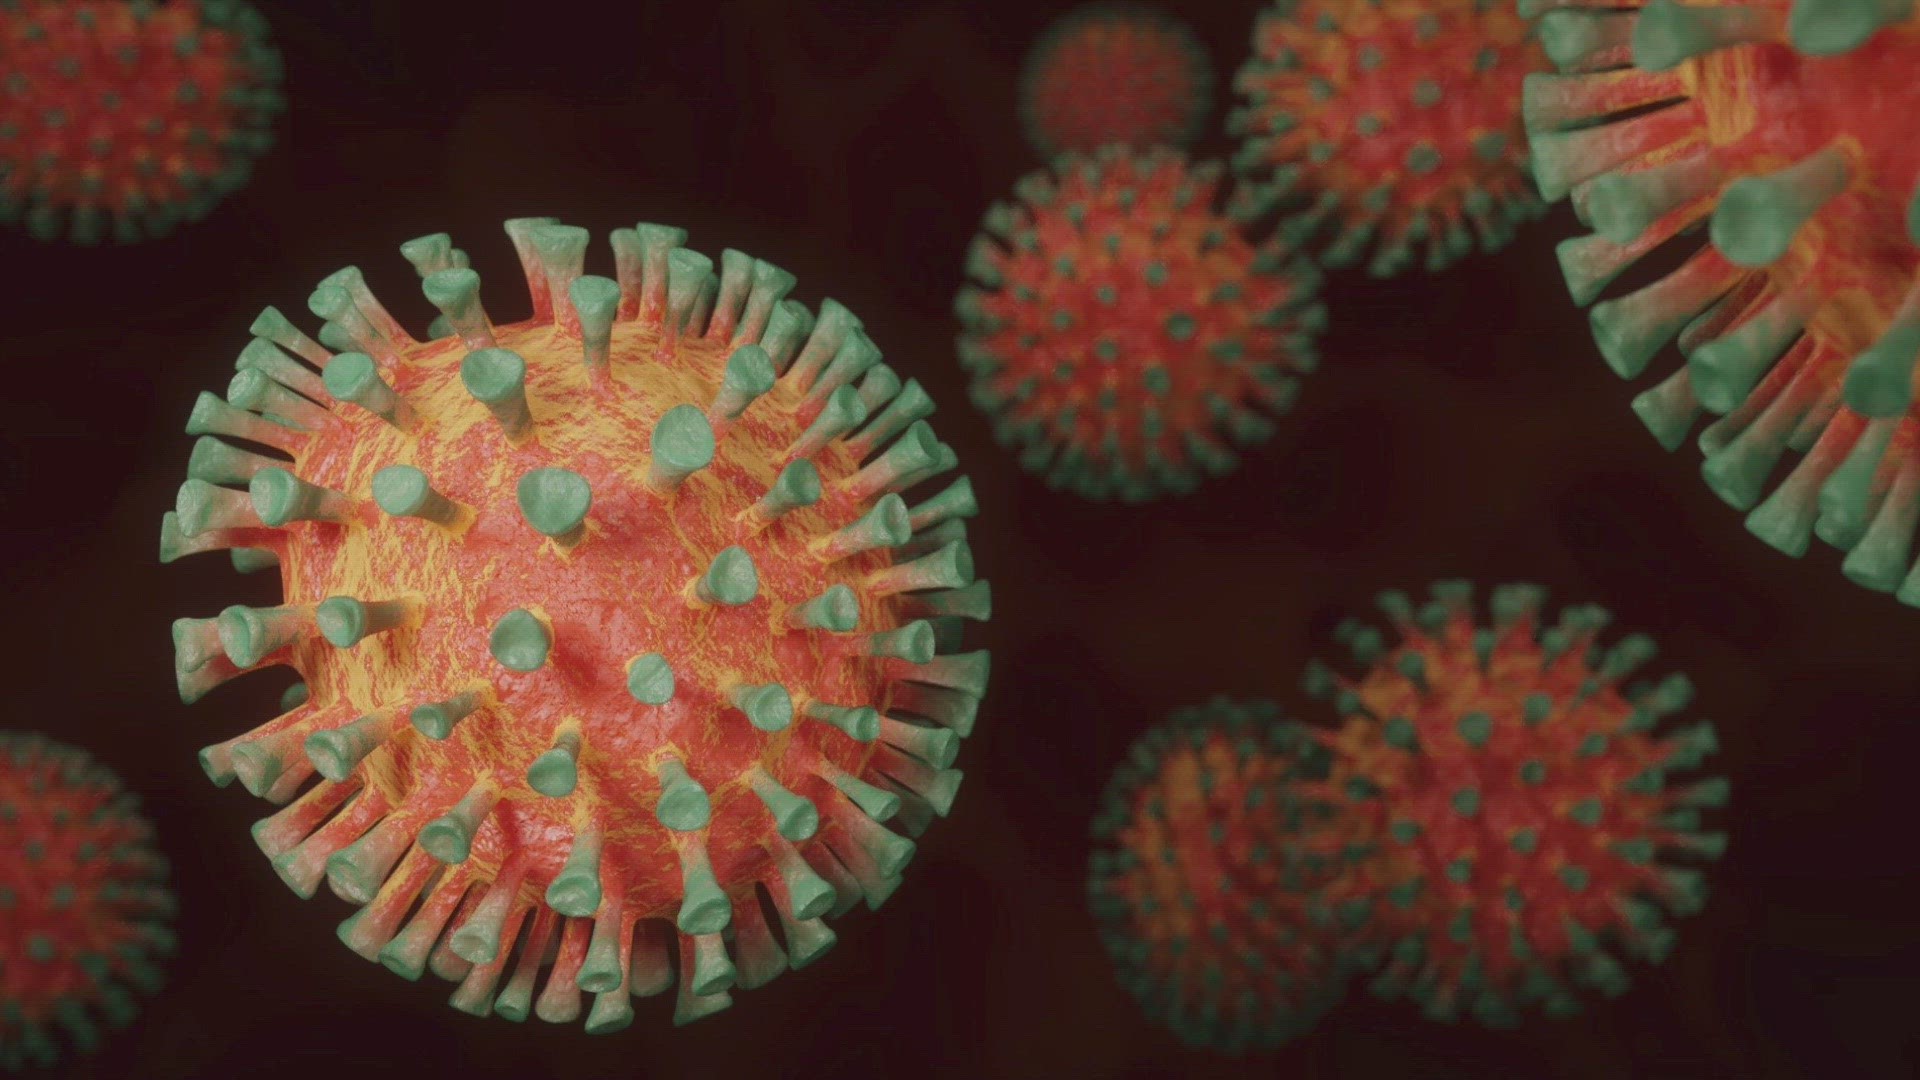 When it comes to seeking treatment for the coronavirus, one in seven Americans say they would skip it over concerns of medical costs. Veuer's Justin Kircher has the story.